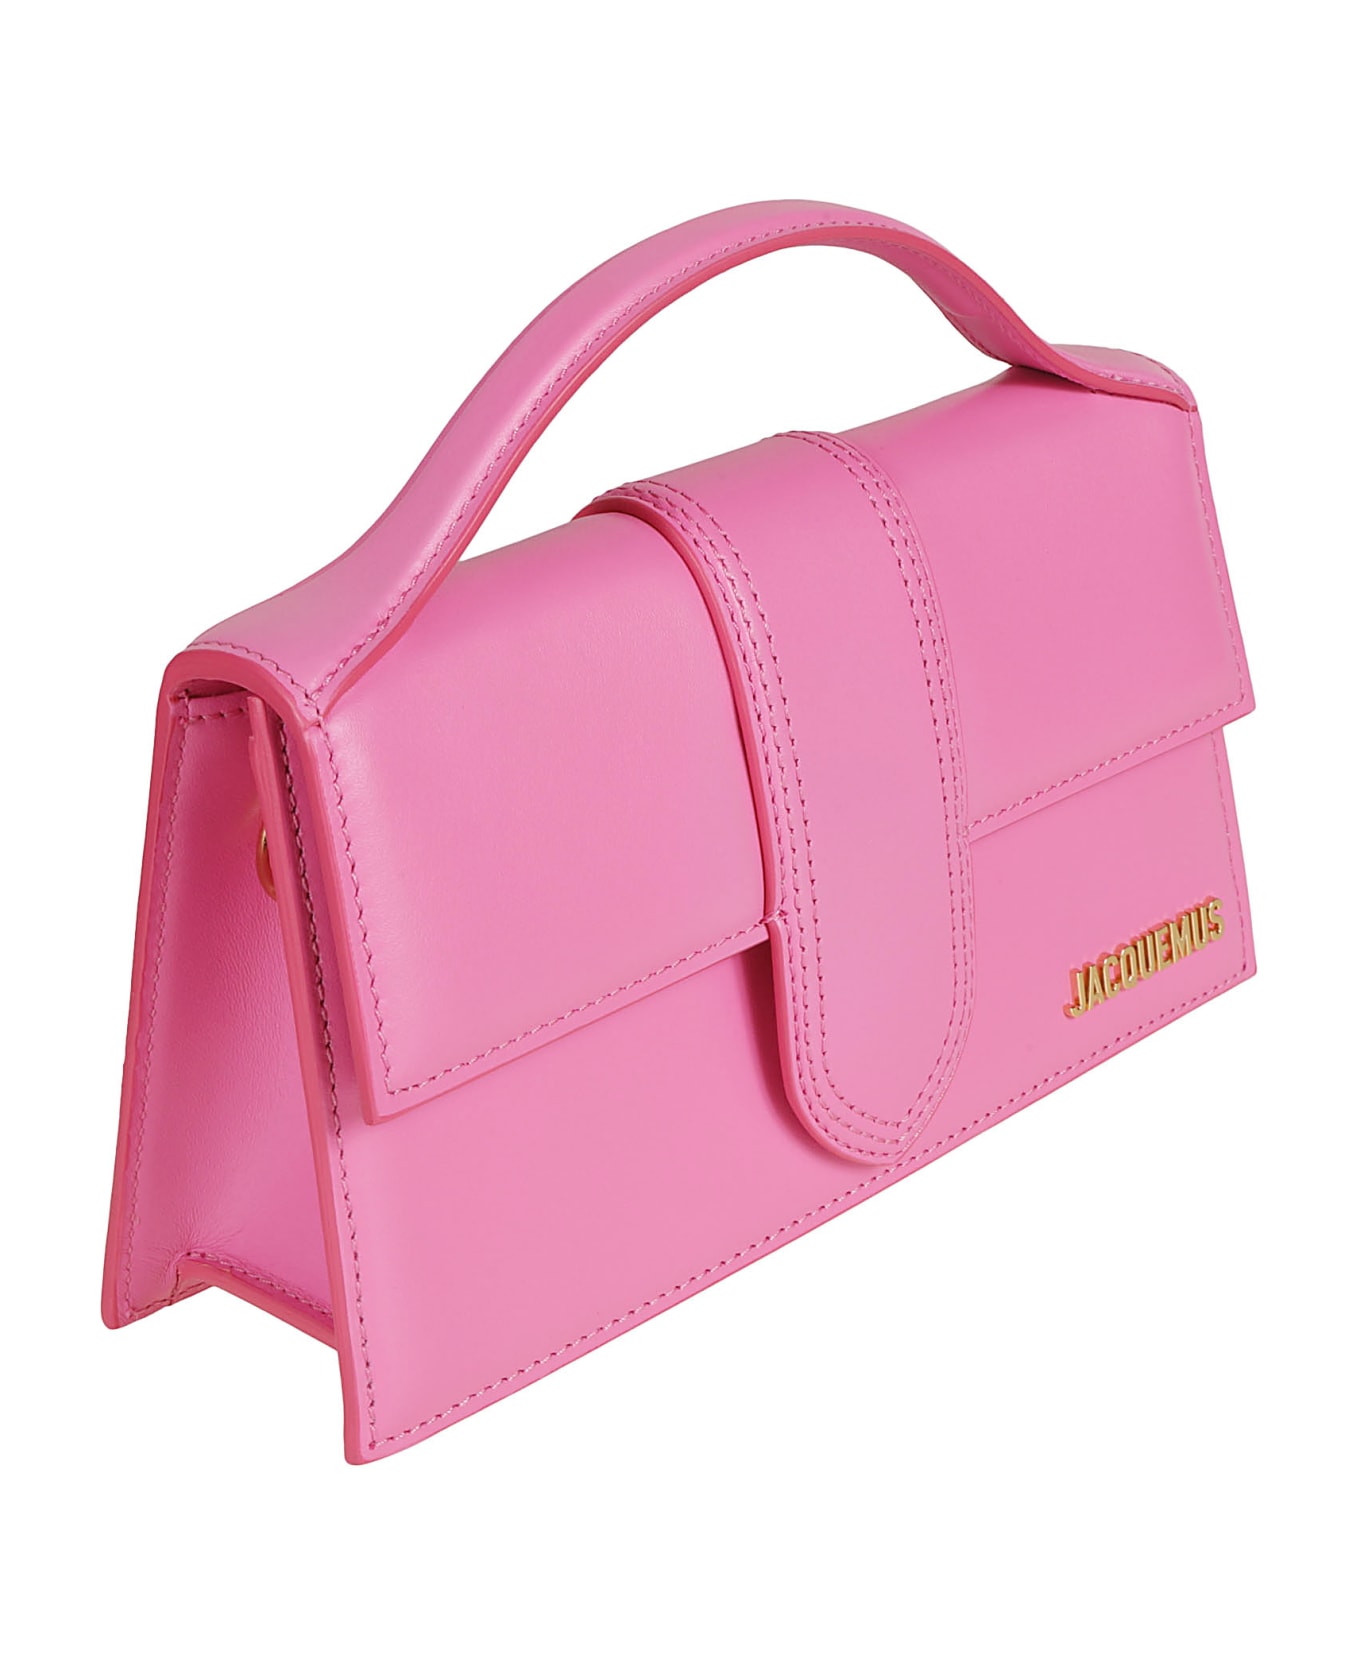 Jacquemus Le Grand Bambino Leather Bag - Neon pink トートバッグ